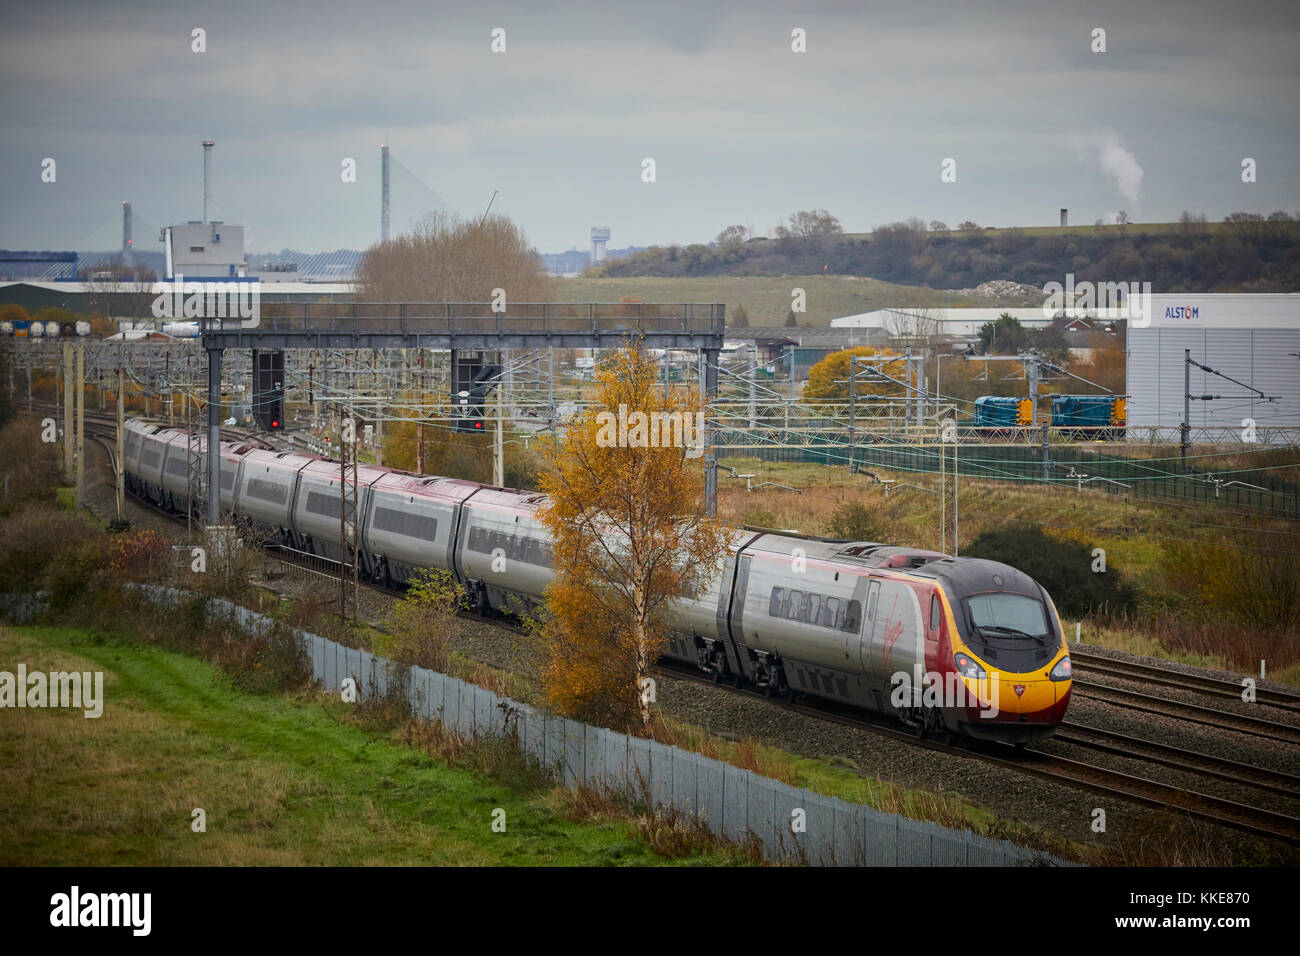 British Rail Class 390 Pendolino train passing Alstom Widnes respraying plant in the Liverpool to London, West Coast Main Line Stock Photo